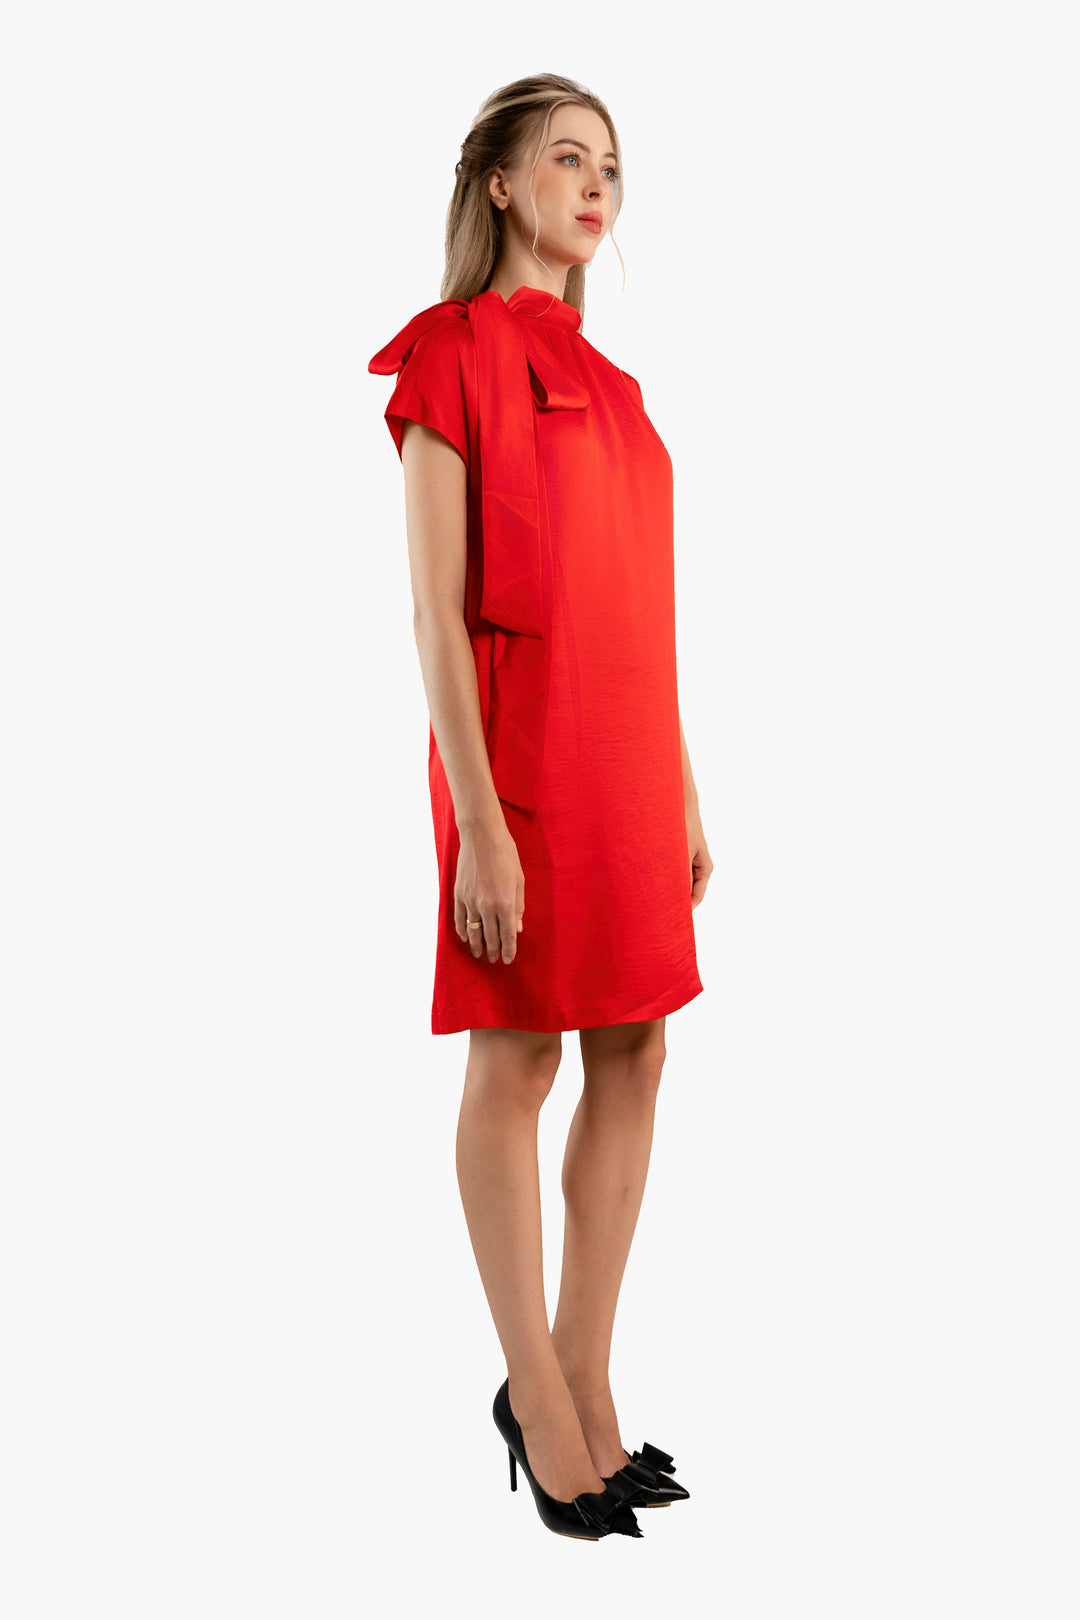 Red satin shift dress with bow on shoulder